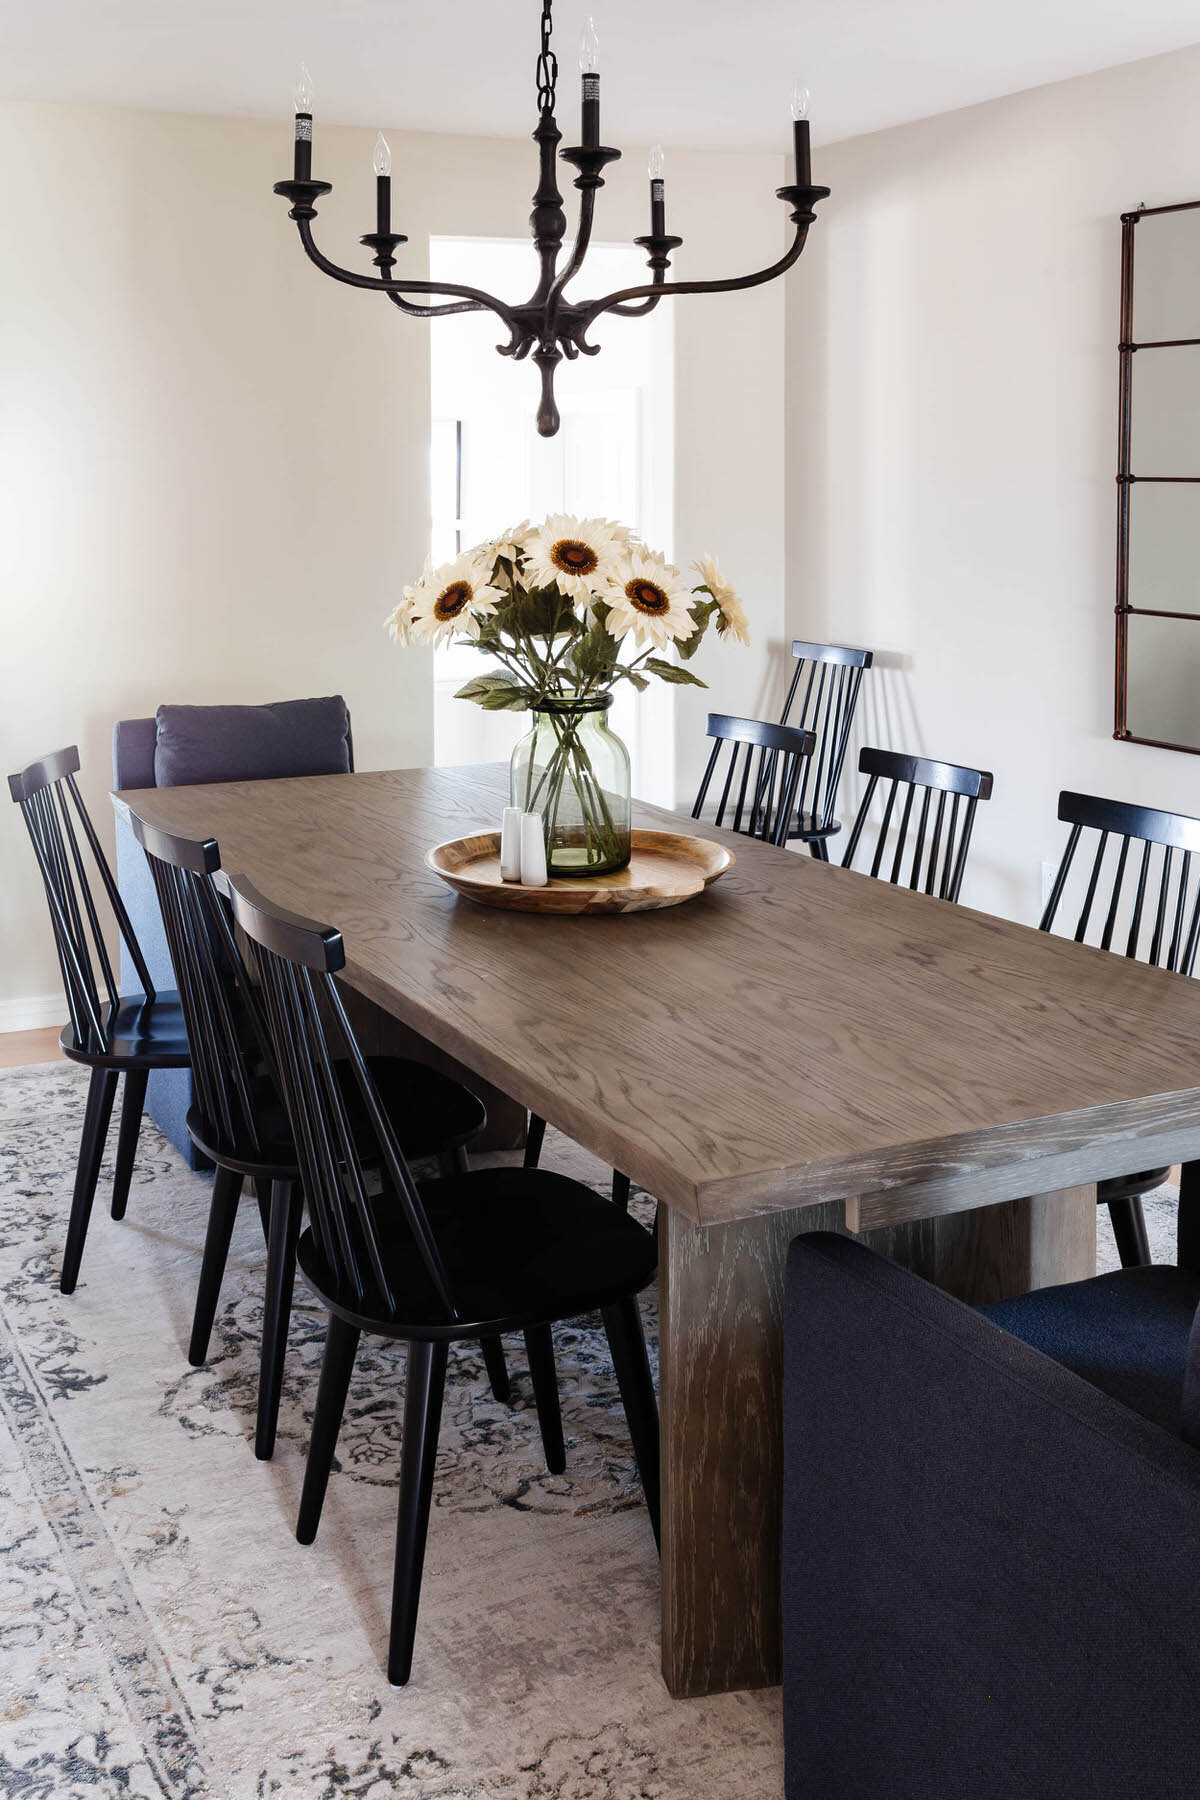 Modern Farmhouse Charming Cottage Warm Formal Dining Room by Peggy Haddad Interiors35